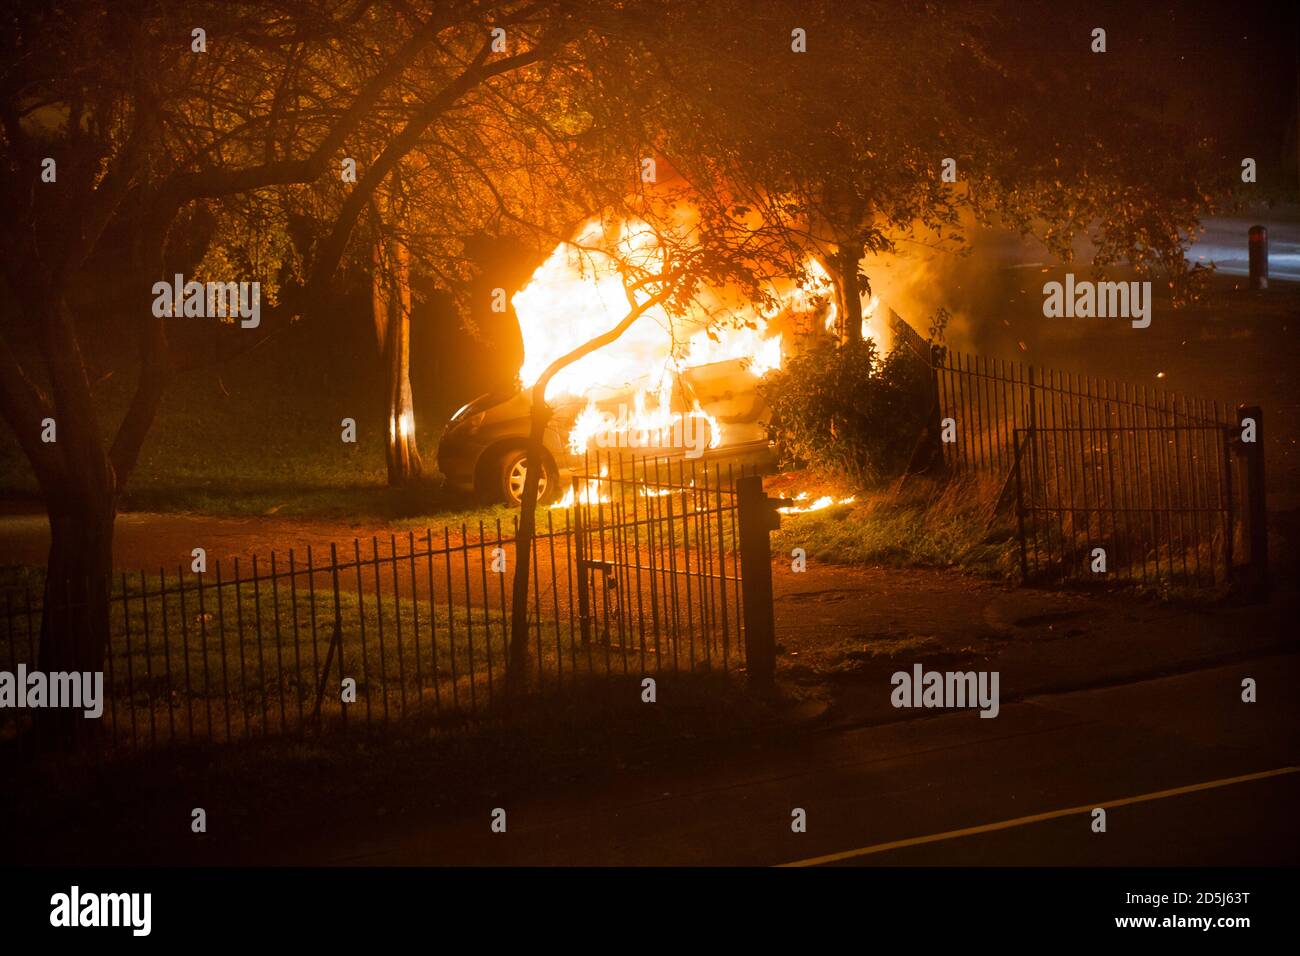 An abandoned car on fire in a public park.Car burning ,lots of flames and smoke. Stock Photo